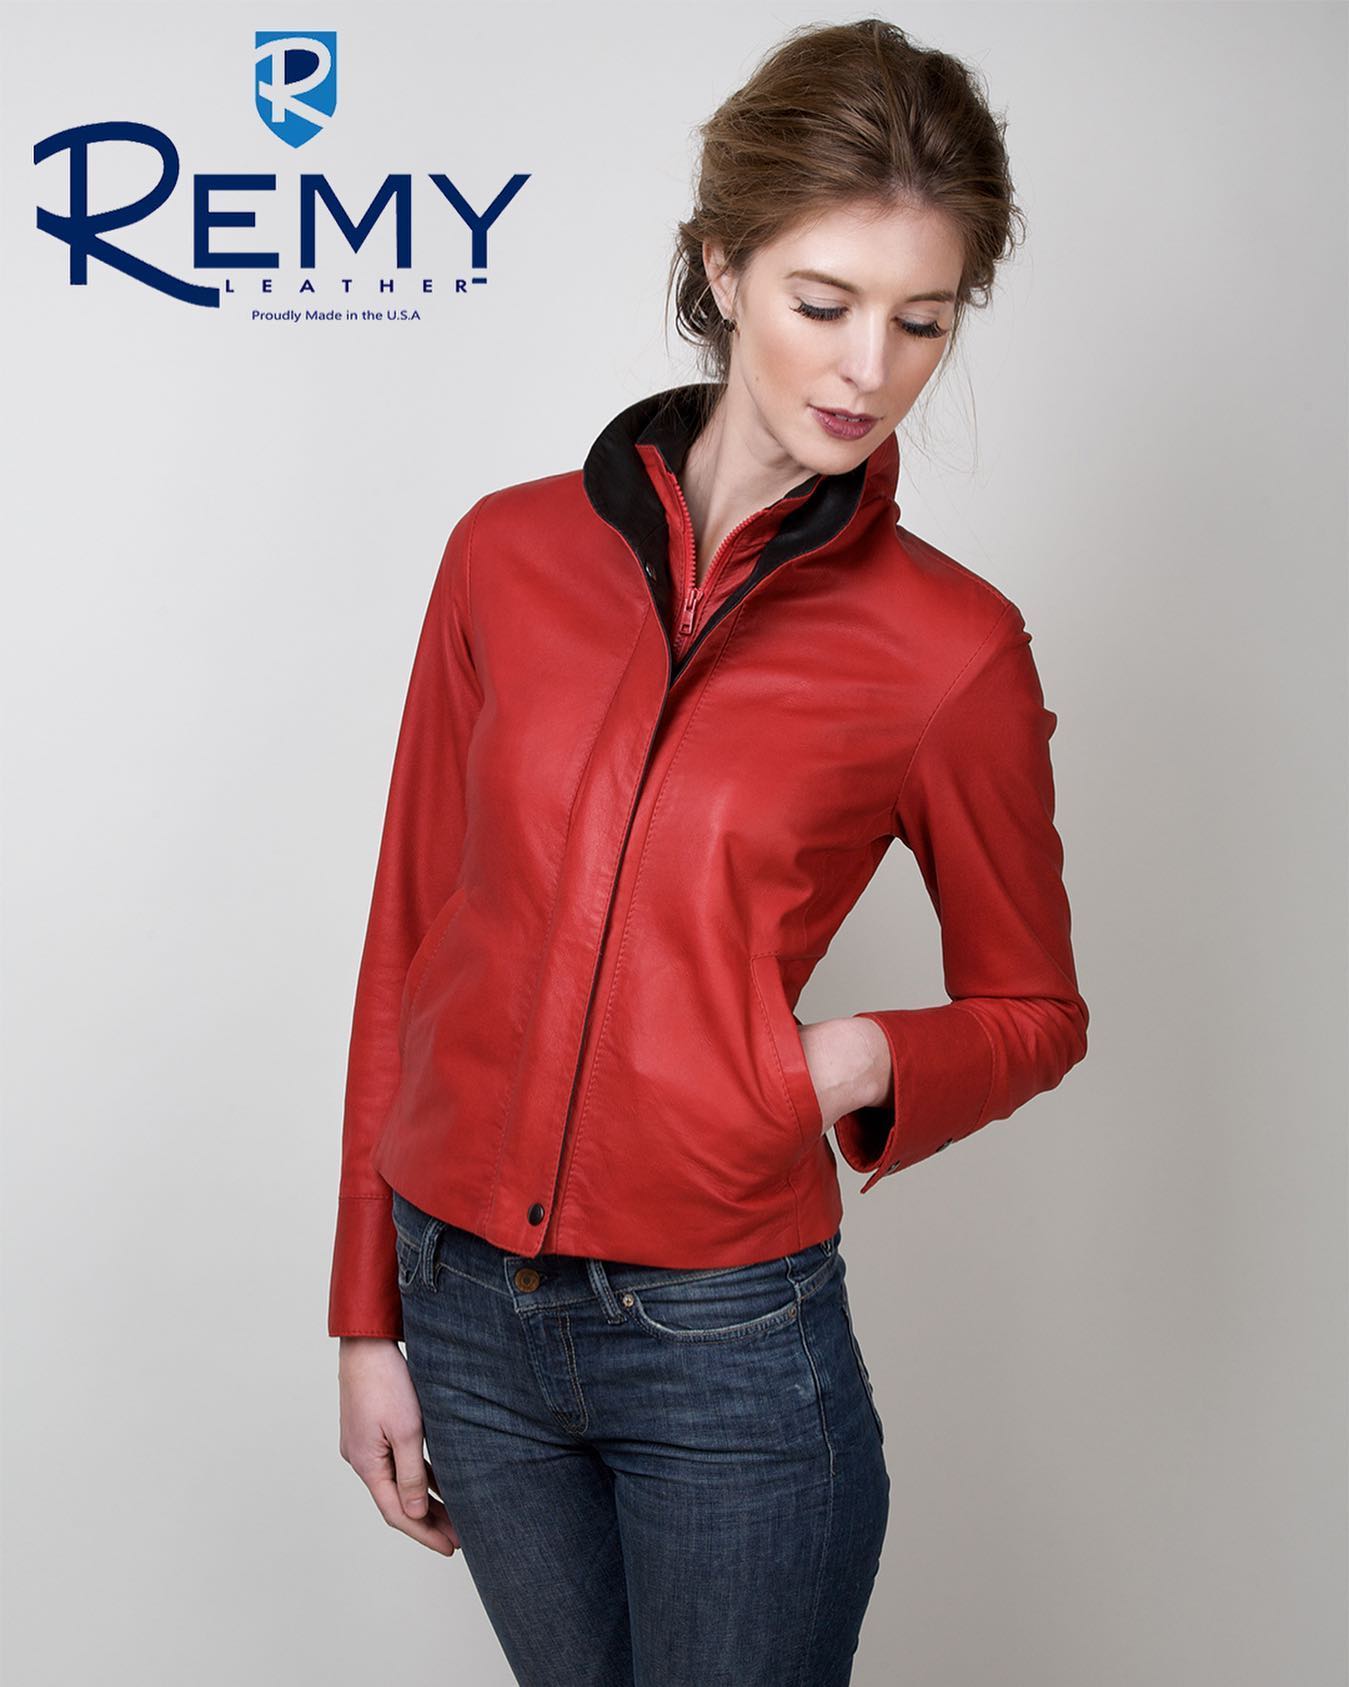 Leather Pegasus Red Light Double Leather Collar Remy Women\'s – (Sausalito)